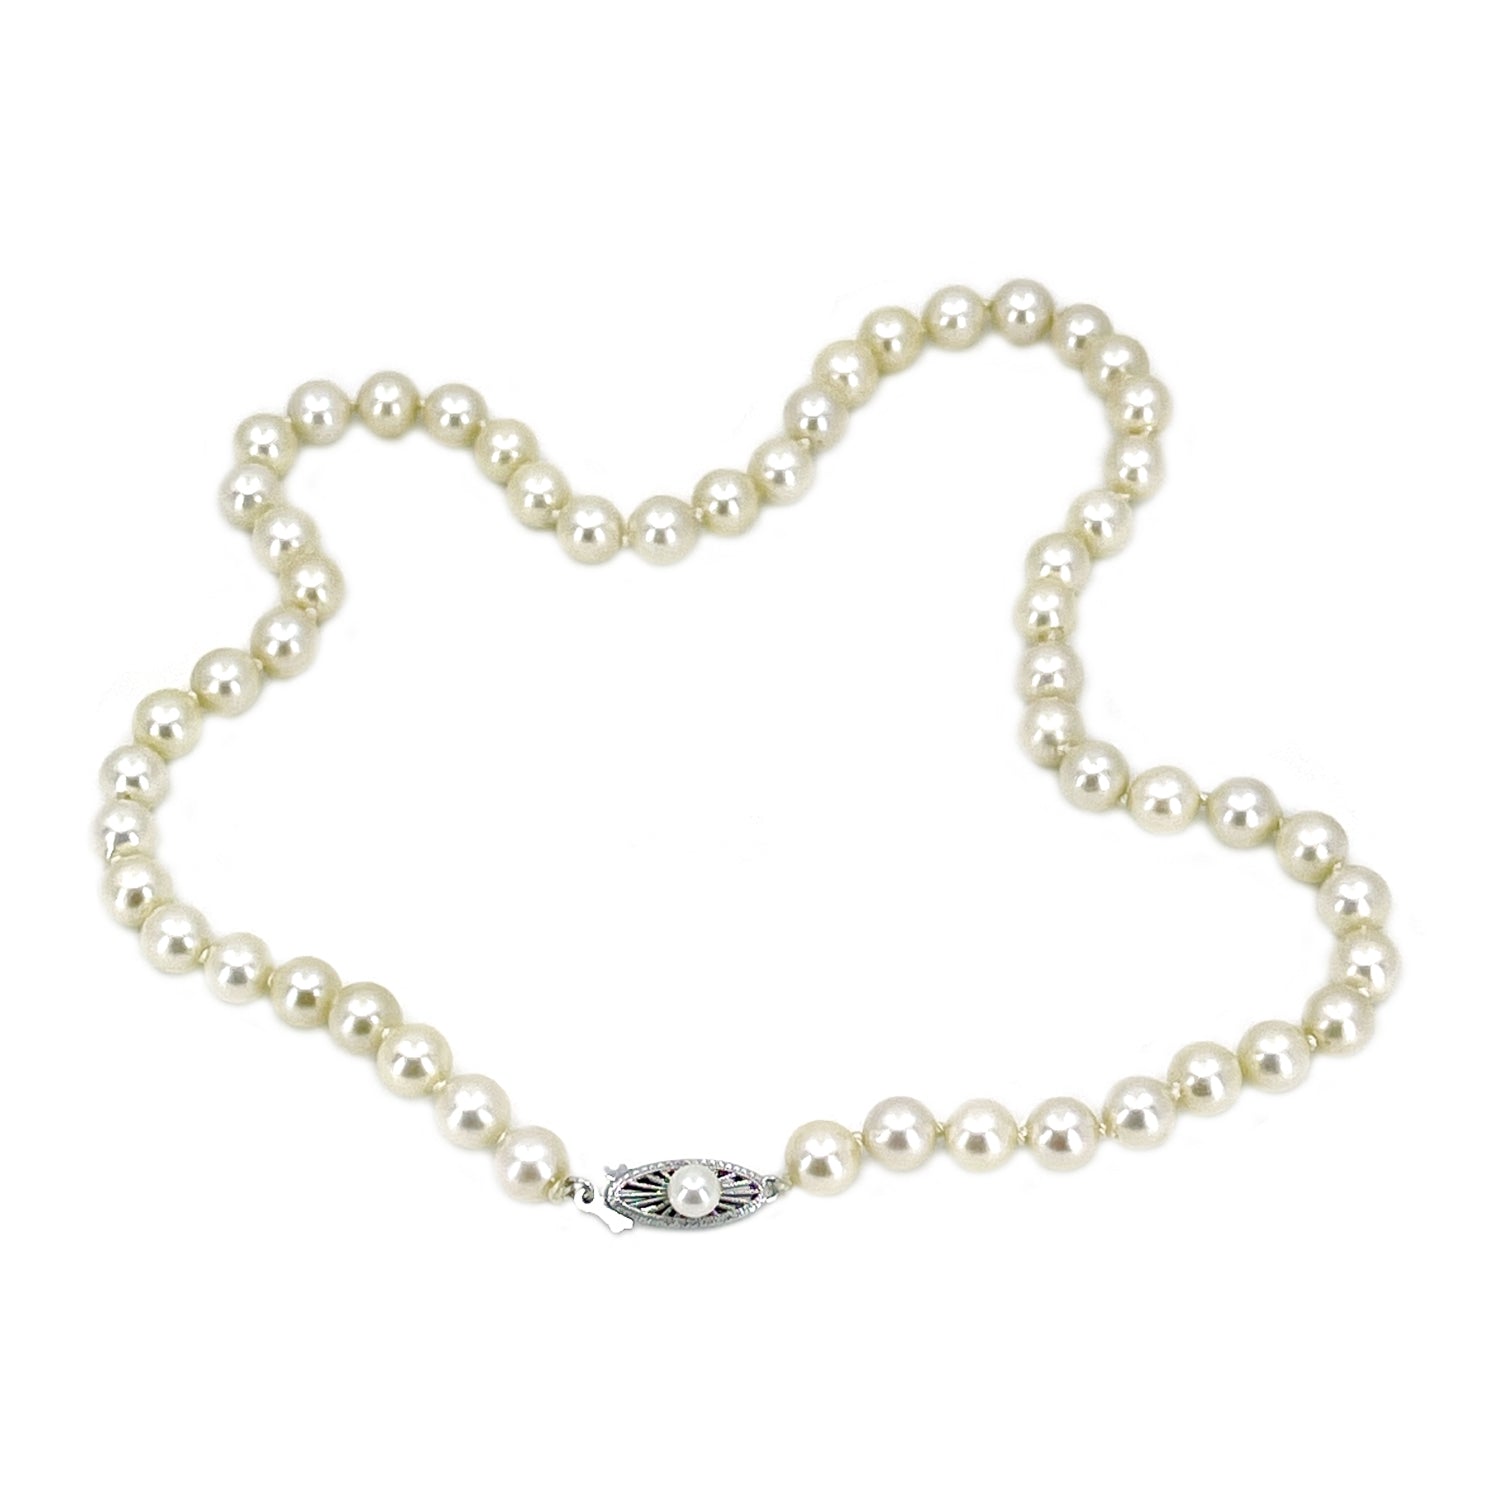 Vintage Choker Filigree Japanese Saltwater Cultured Akoya Pearl Necklace - 14K White Gold 15 Inch